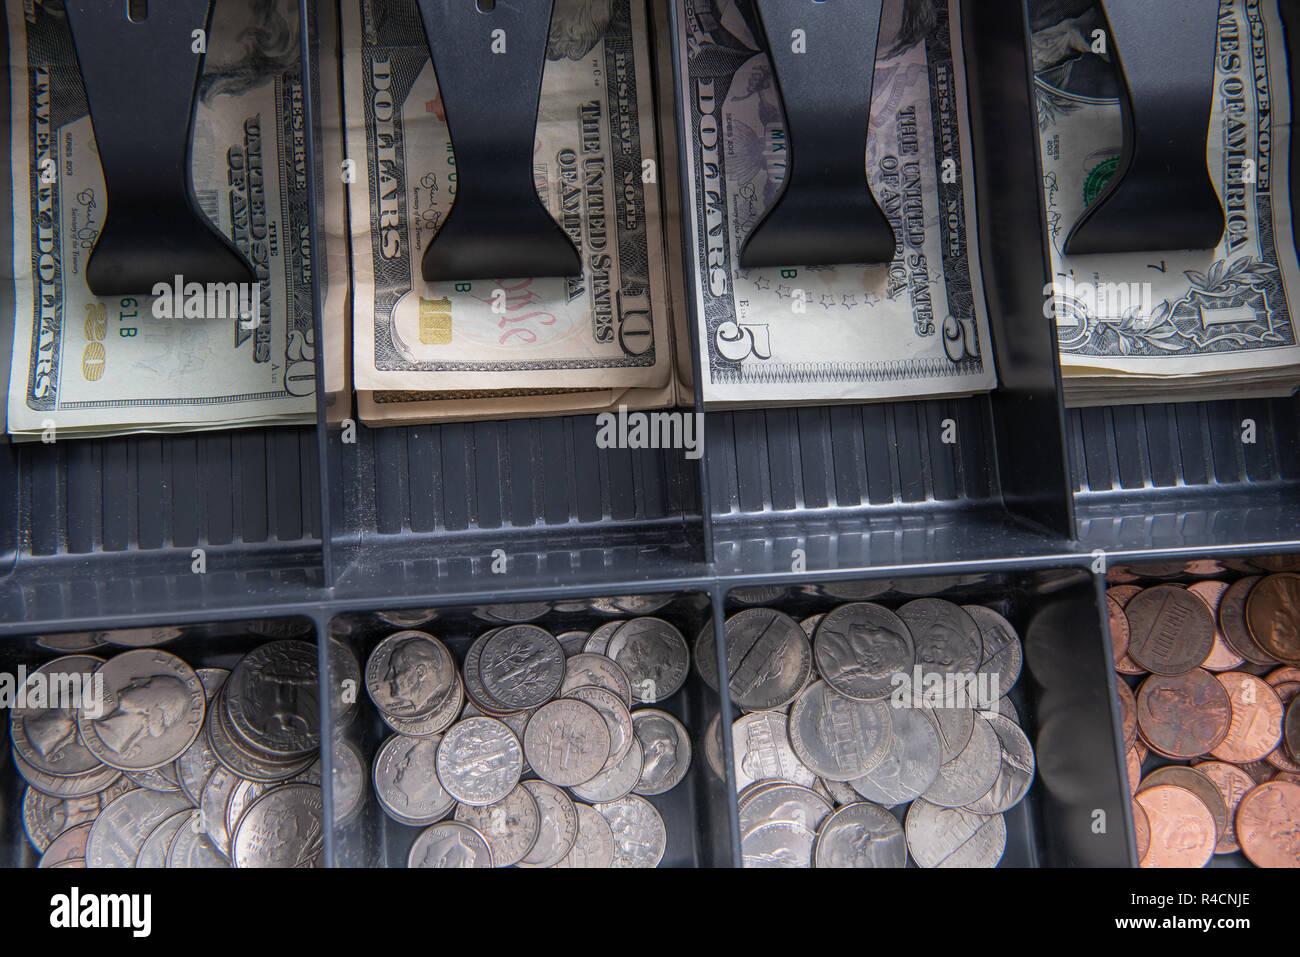 An open cash register drawer showing US currency and coins. Stock Photo